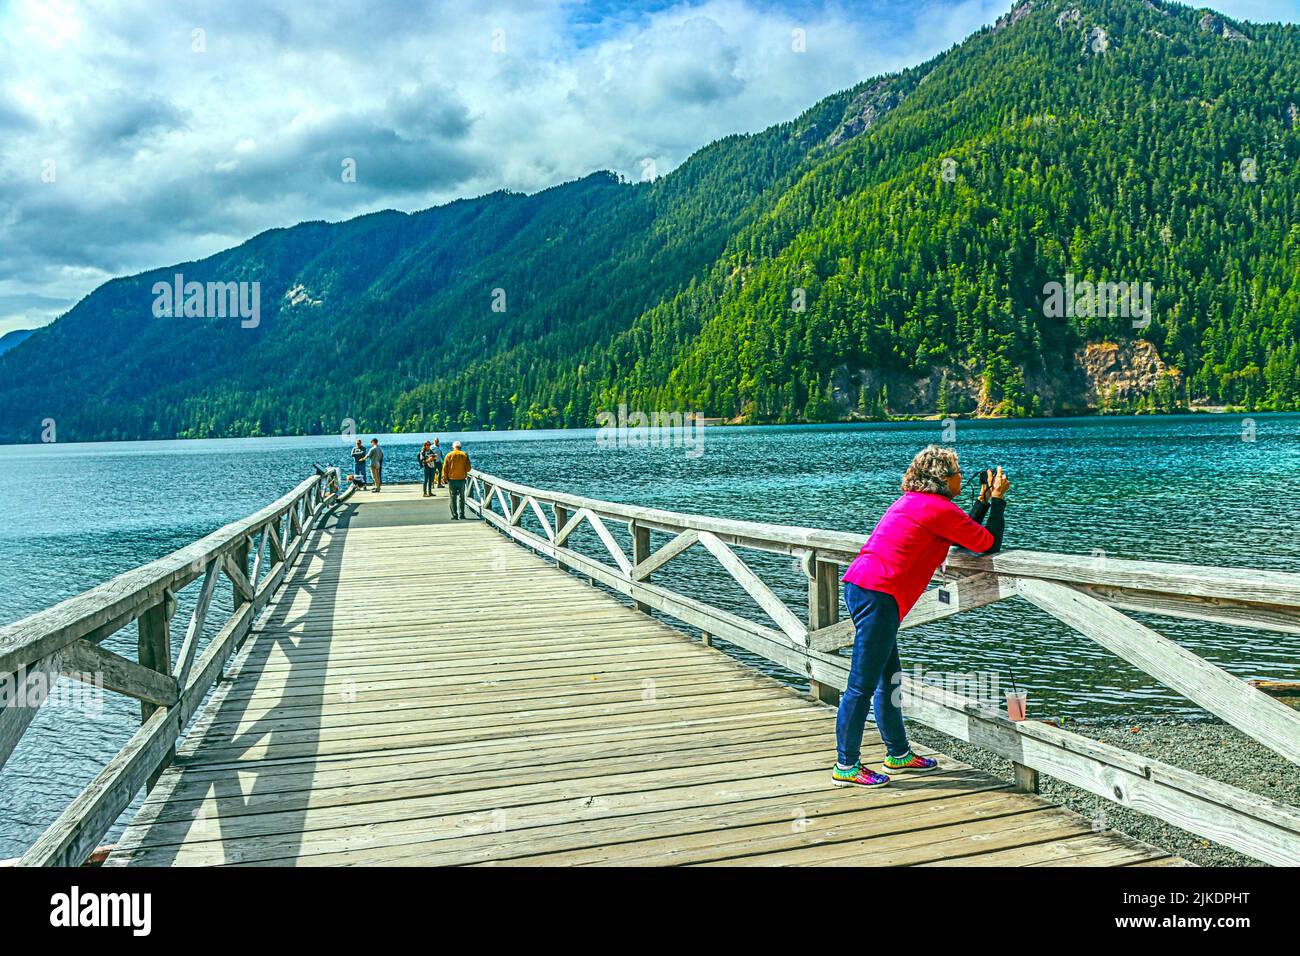 Lake Crescent in the Olympic National Park. Washington state, U. S. A. Stock Photo